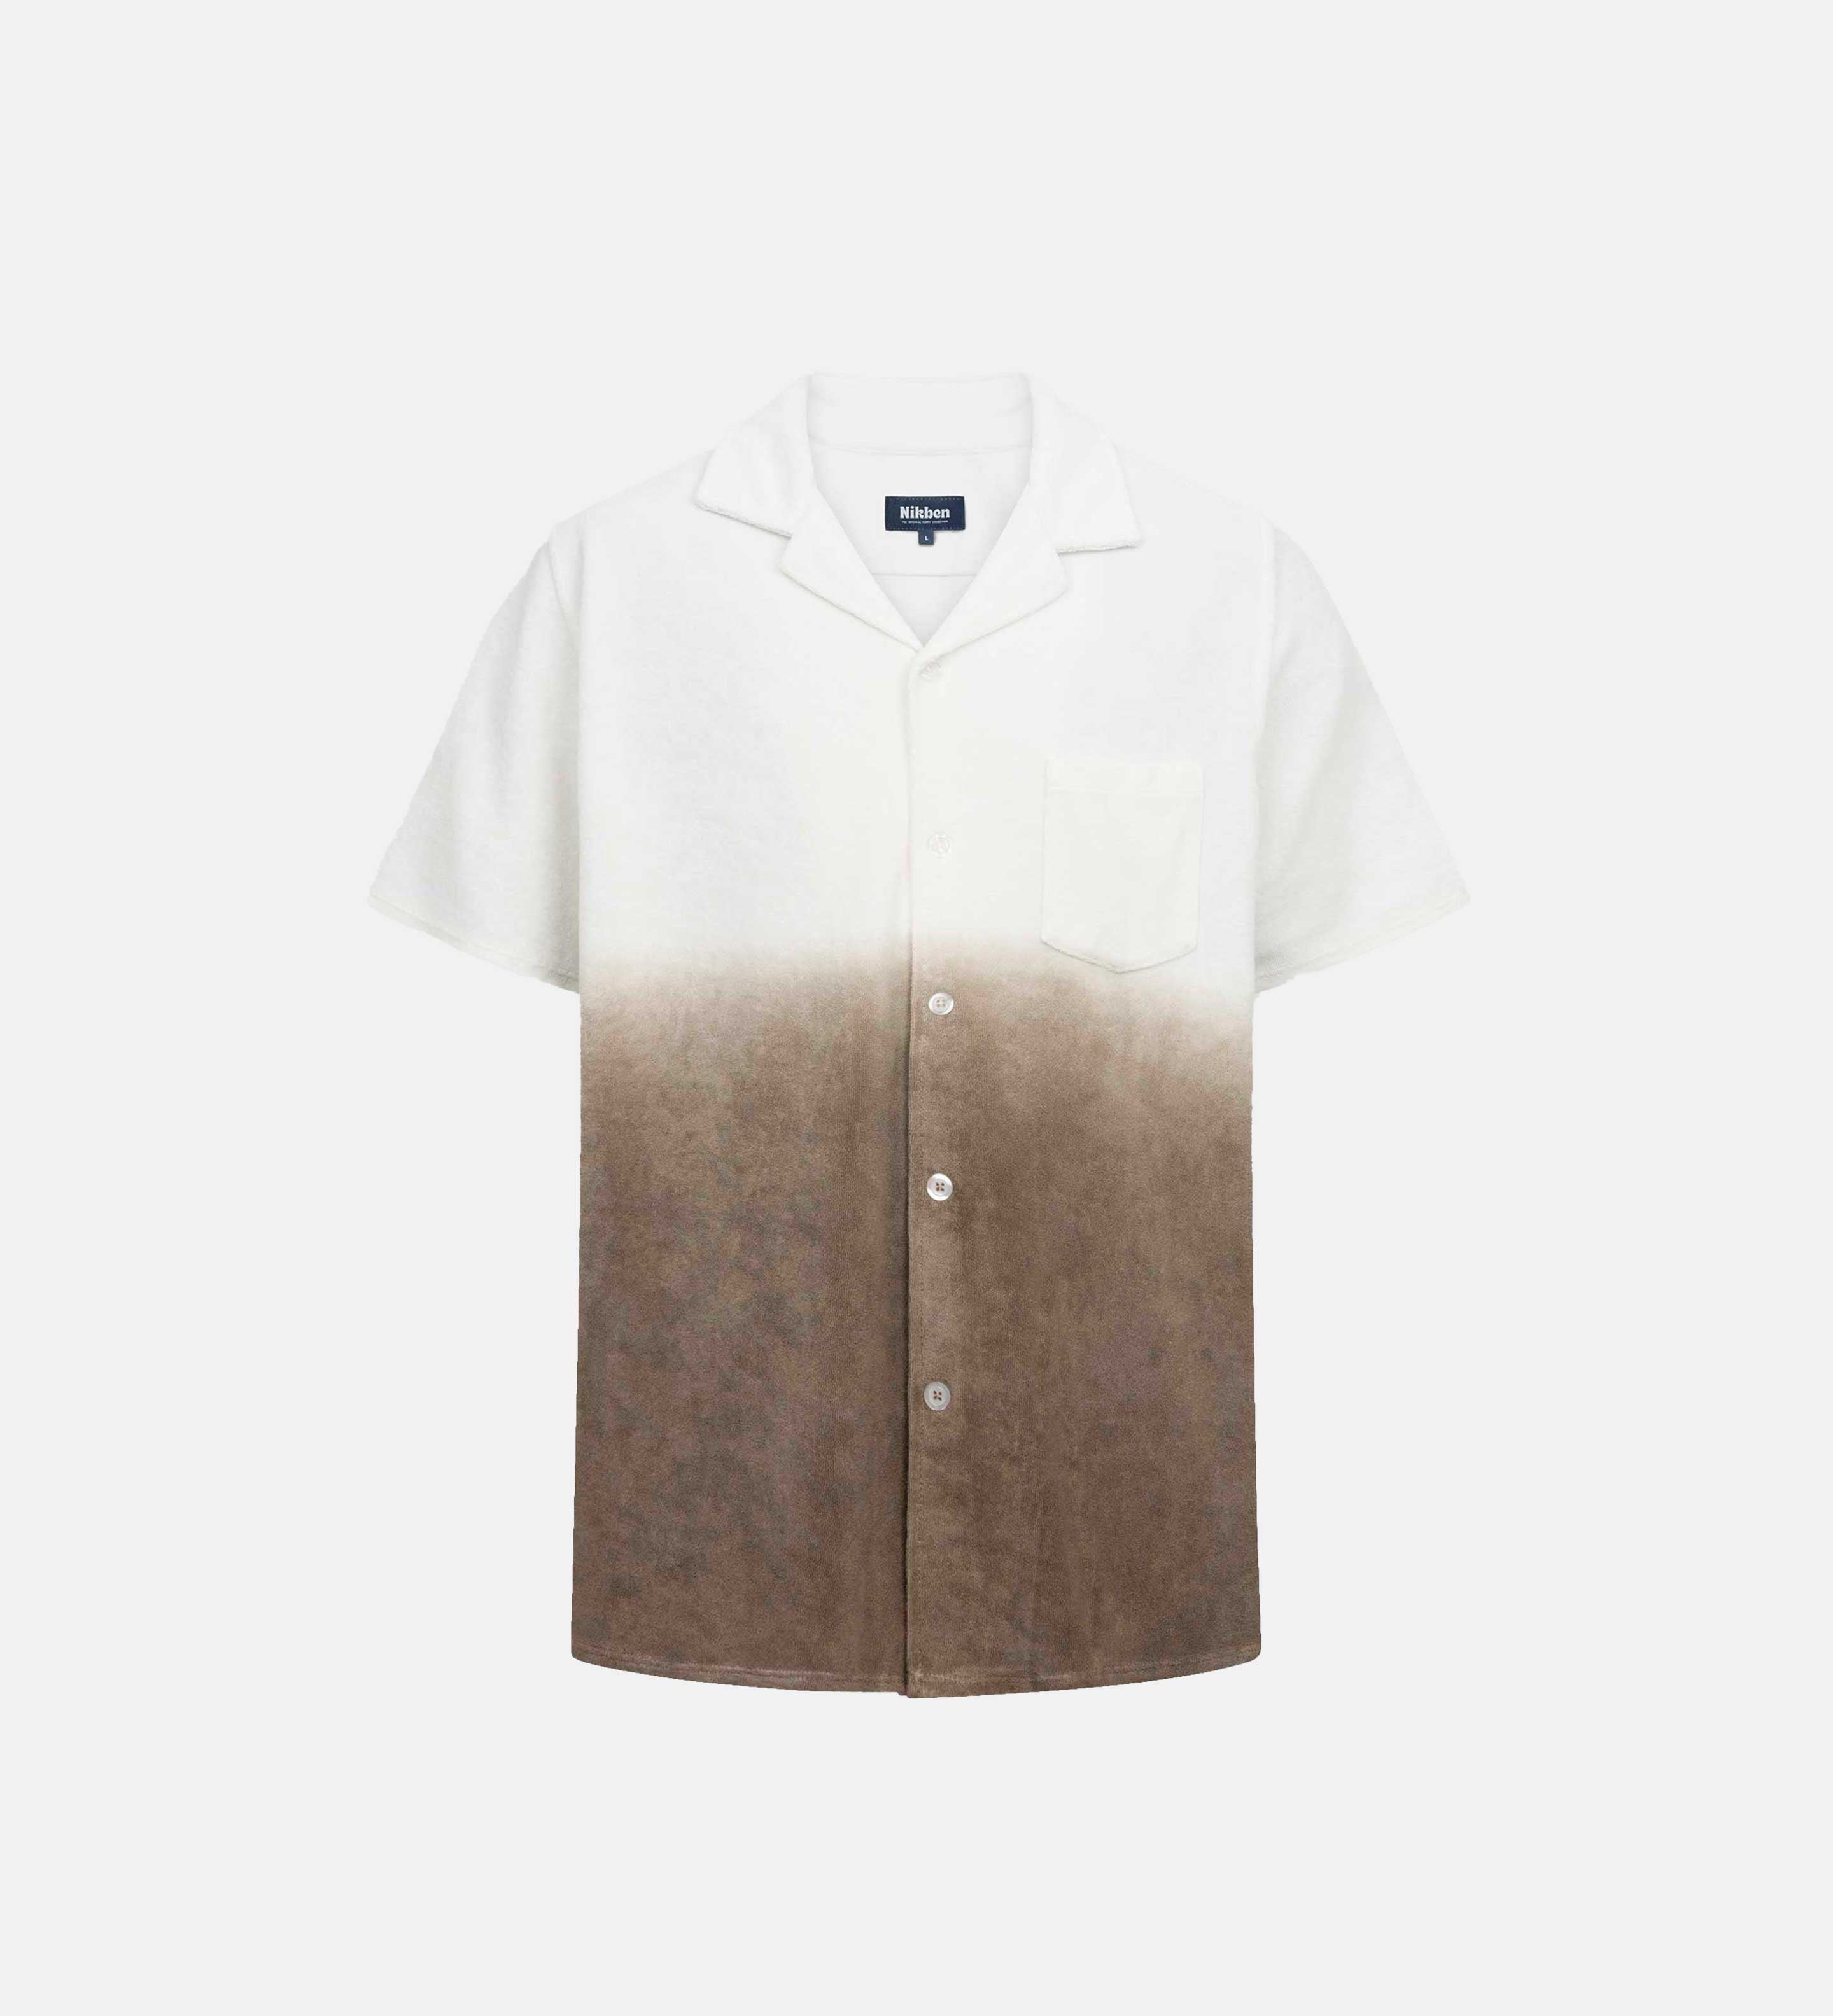 White and brown short sleeve shirt with white button closure and one chest pocket